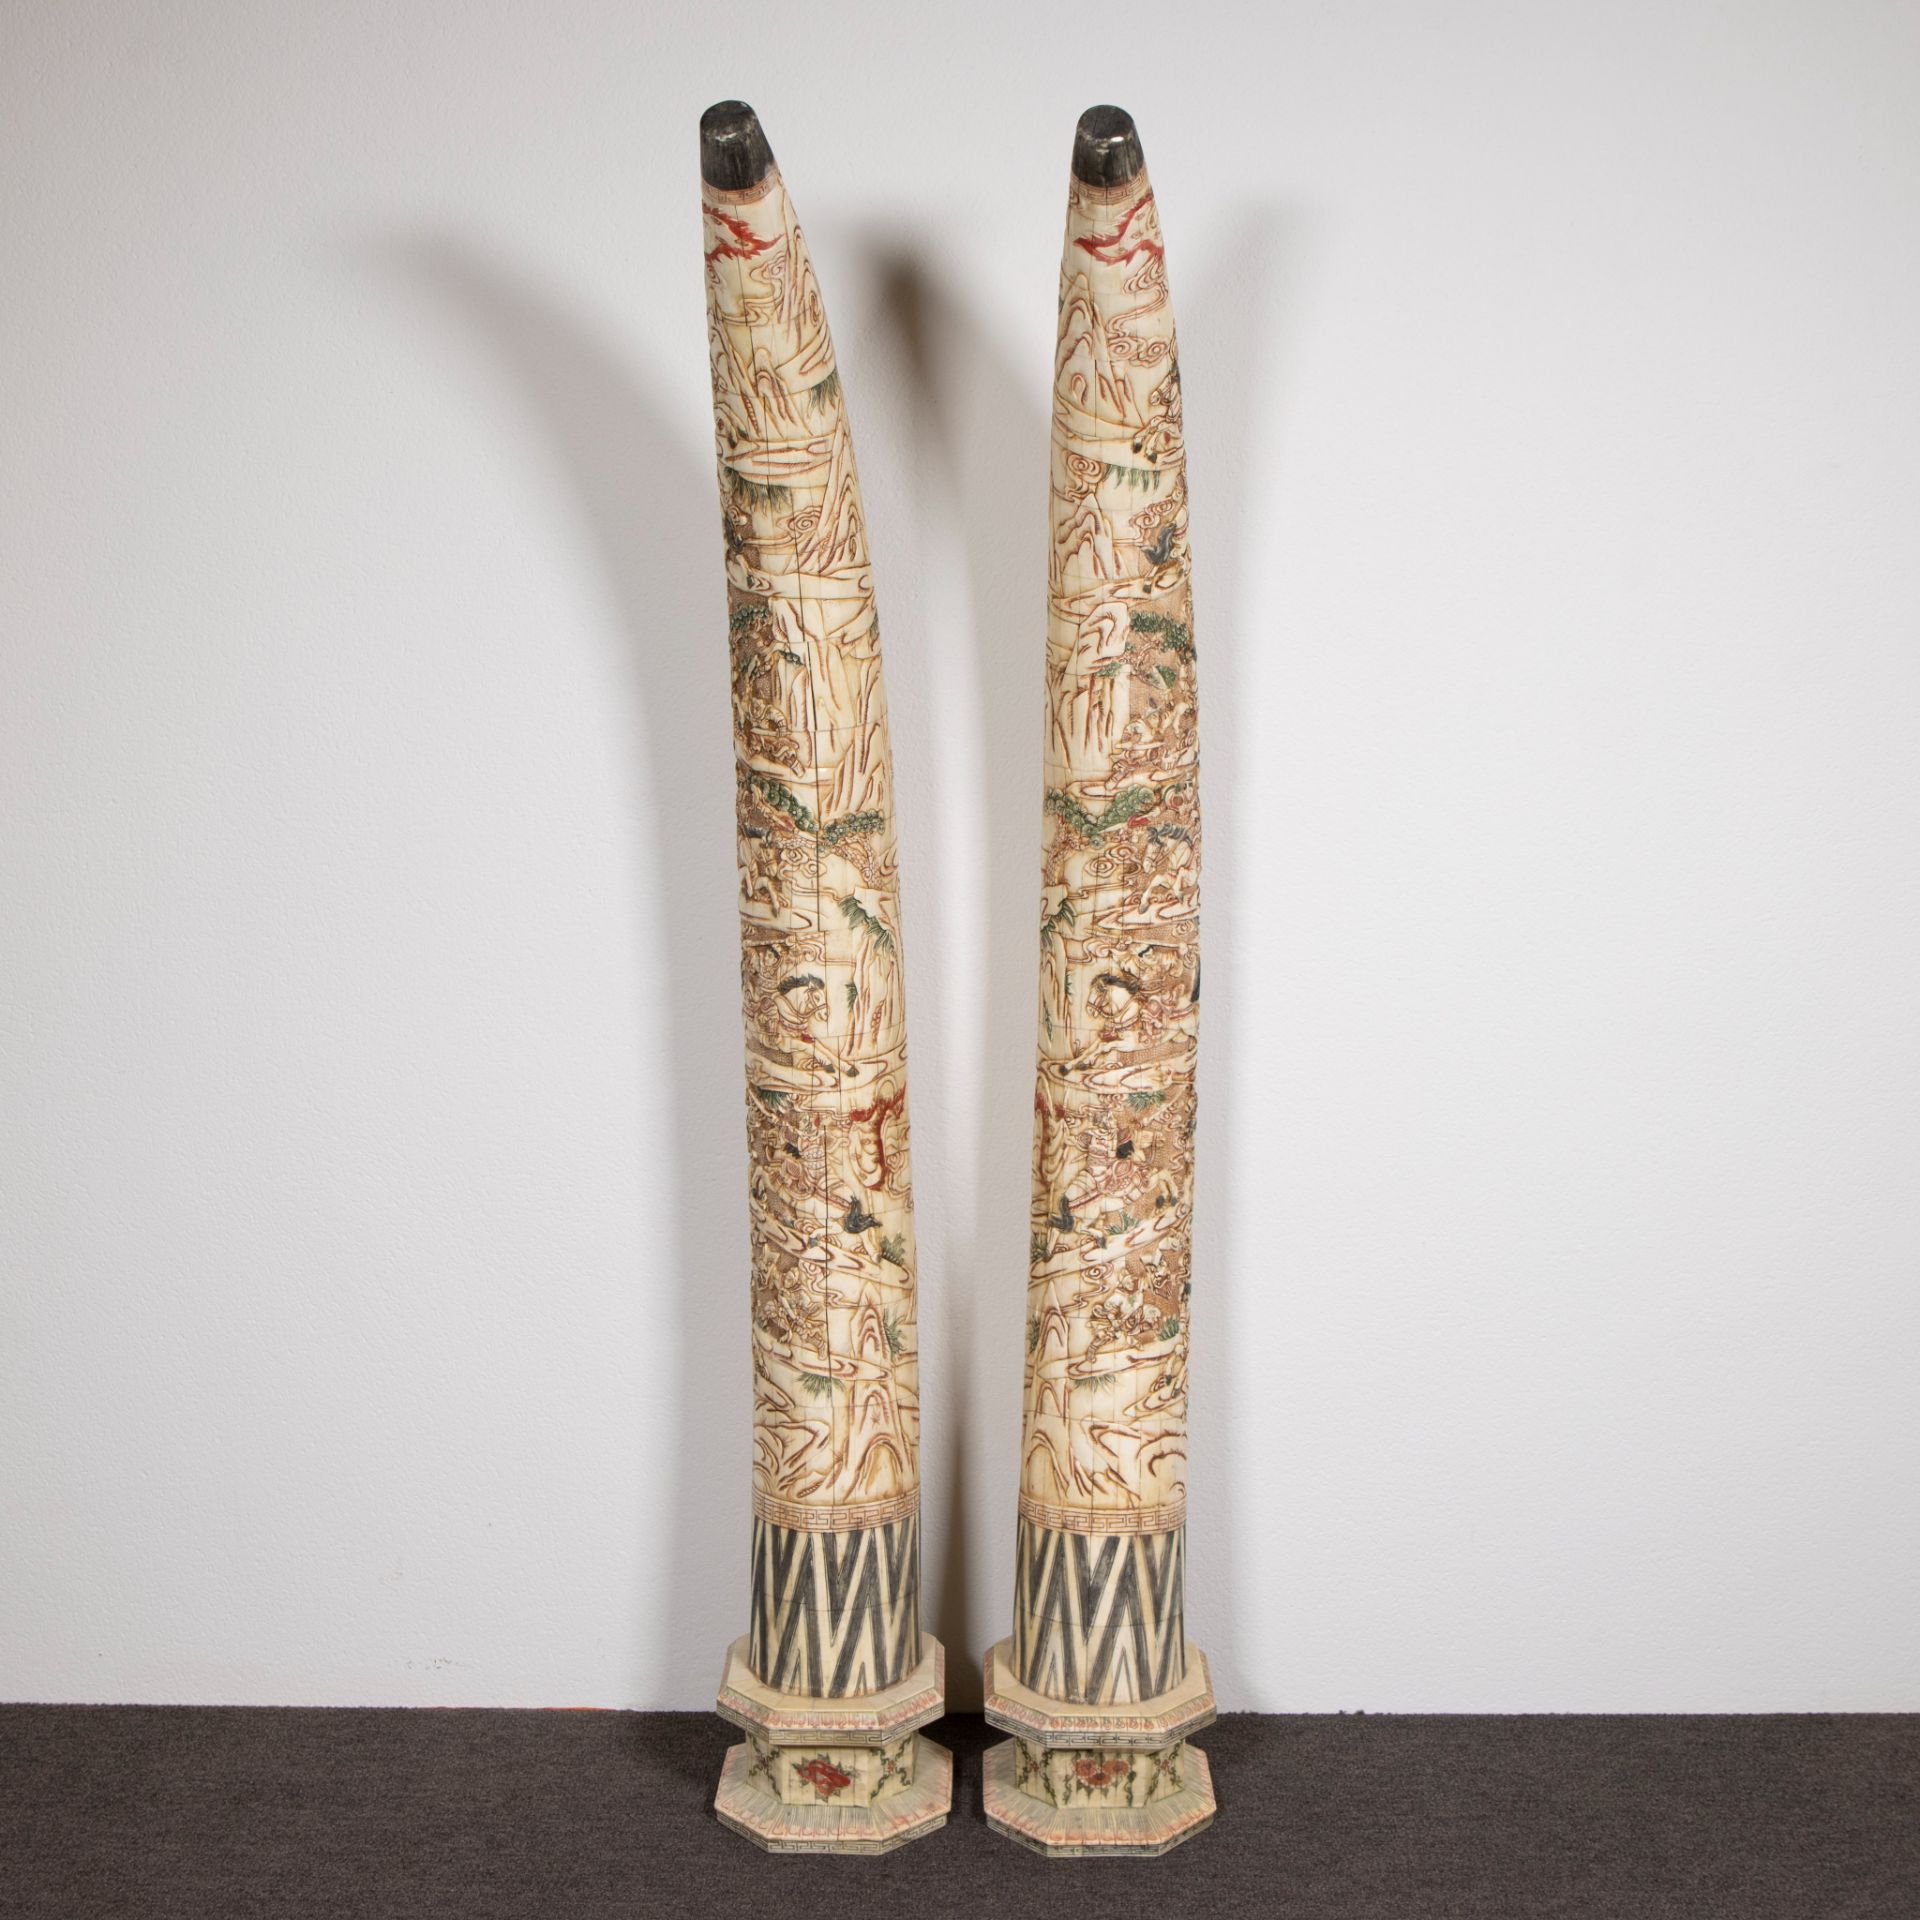 Exceptionally large pair of 'tusks' made of glued pieces of bone depicting battle scenes, circa 1890 - Image 4 of 4